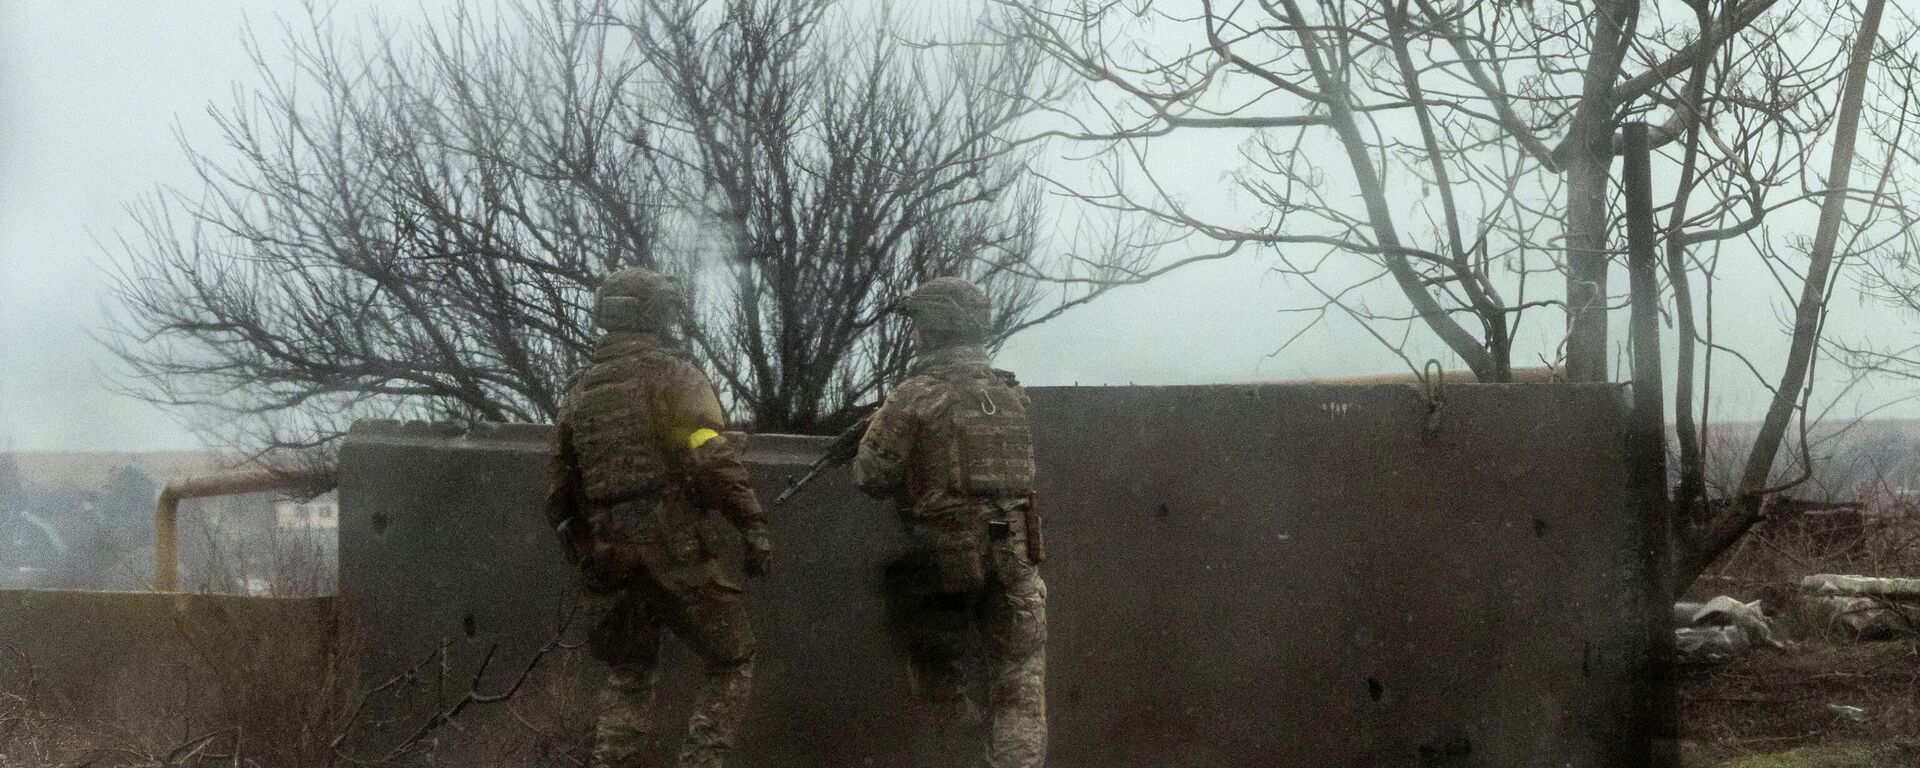 Service members of the Ukrainian armed forces take position near the port of Mariupol, after Russian President Vladimir Putin authorized a military operation in eastern Ukraine, in Mariupol, February 24, 2022 - Sputnik International, 1920, 11.03.2022